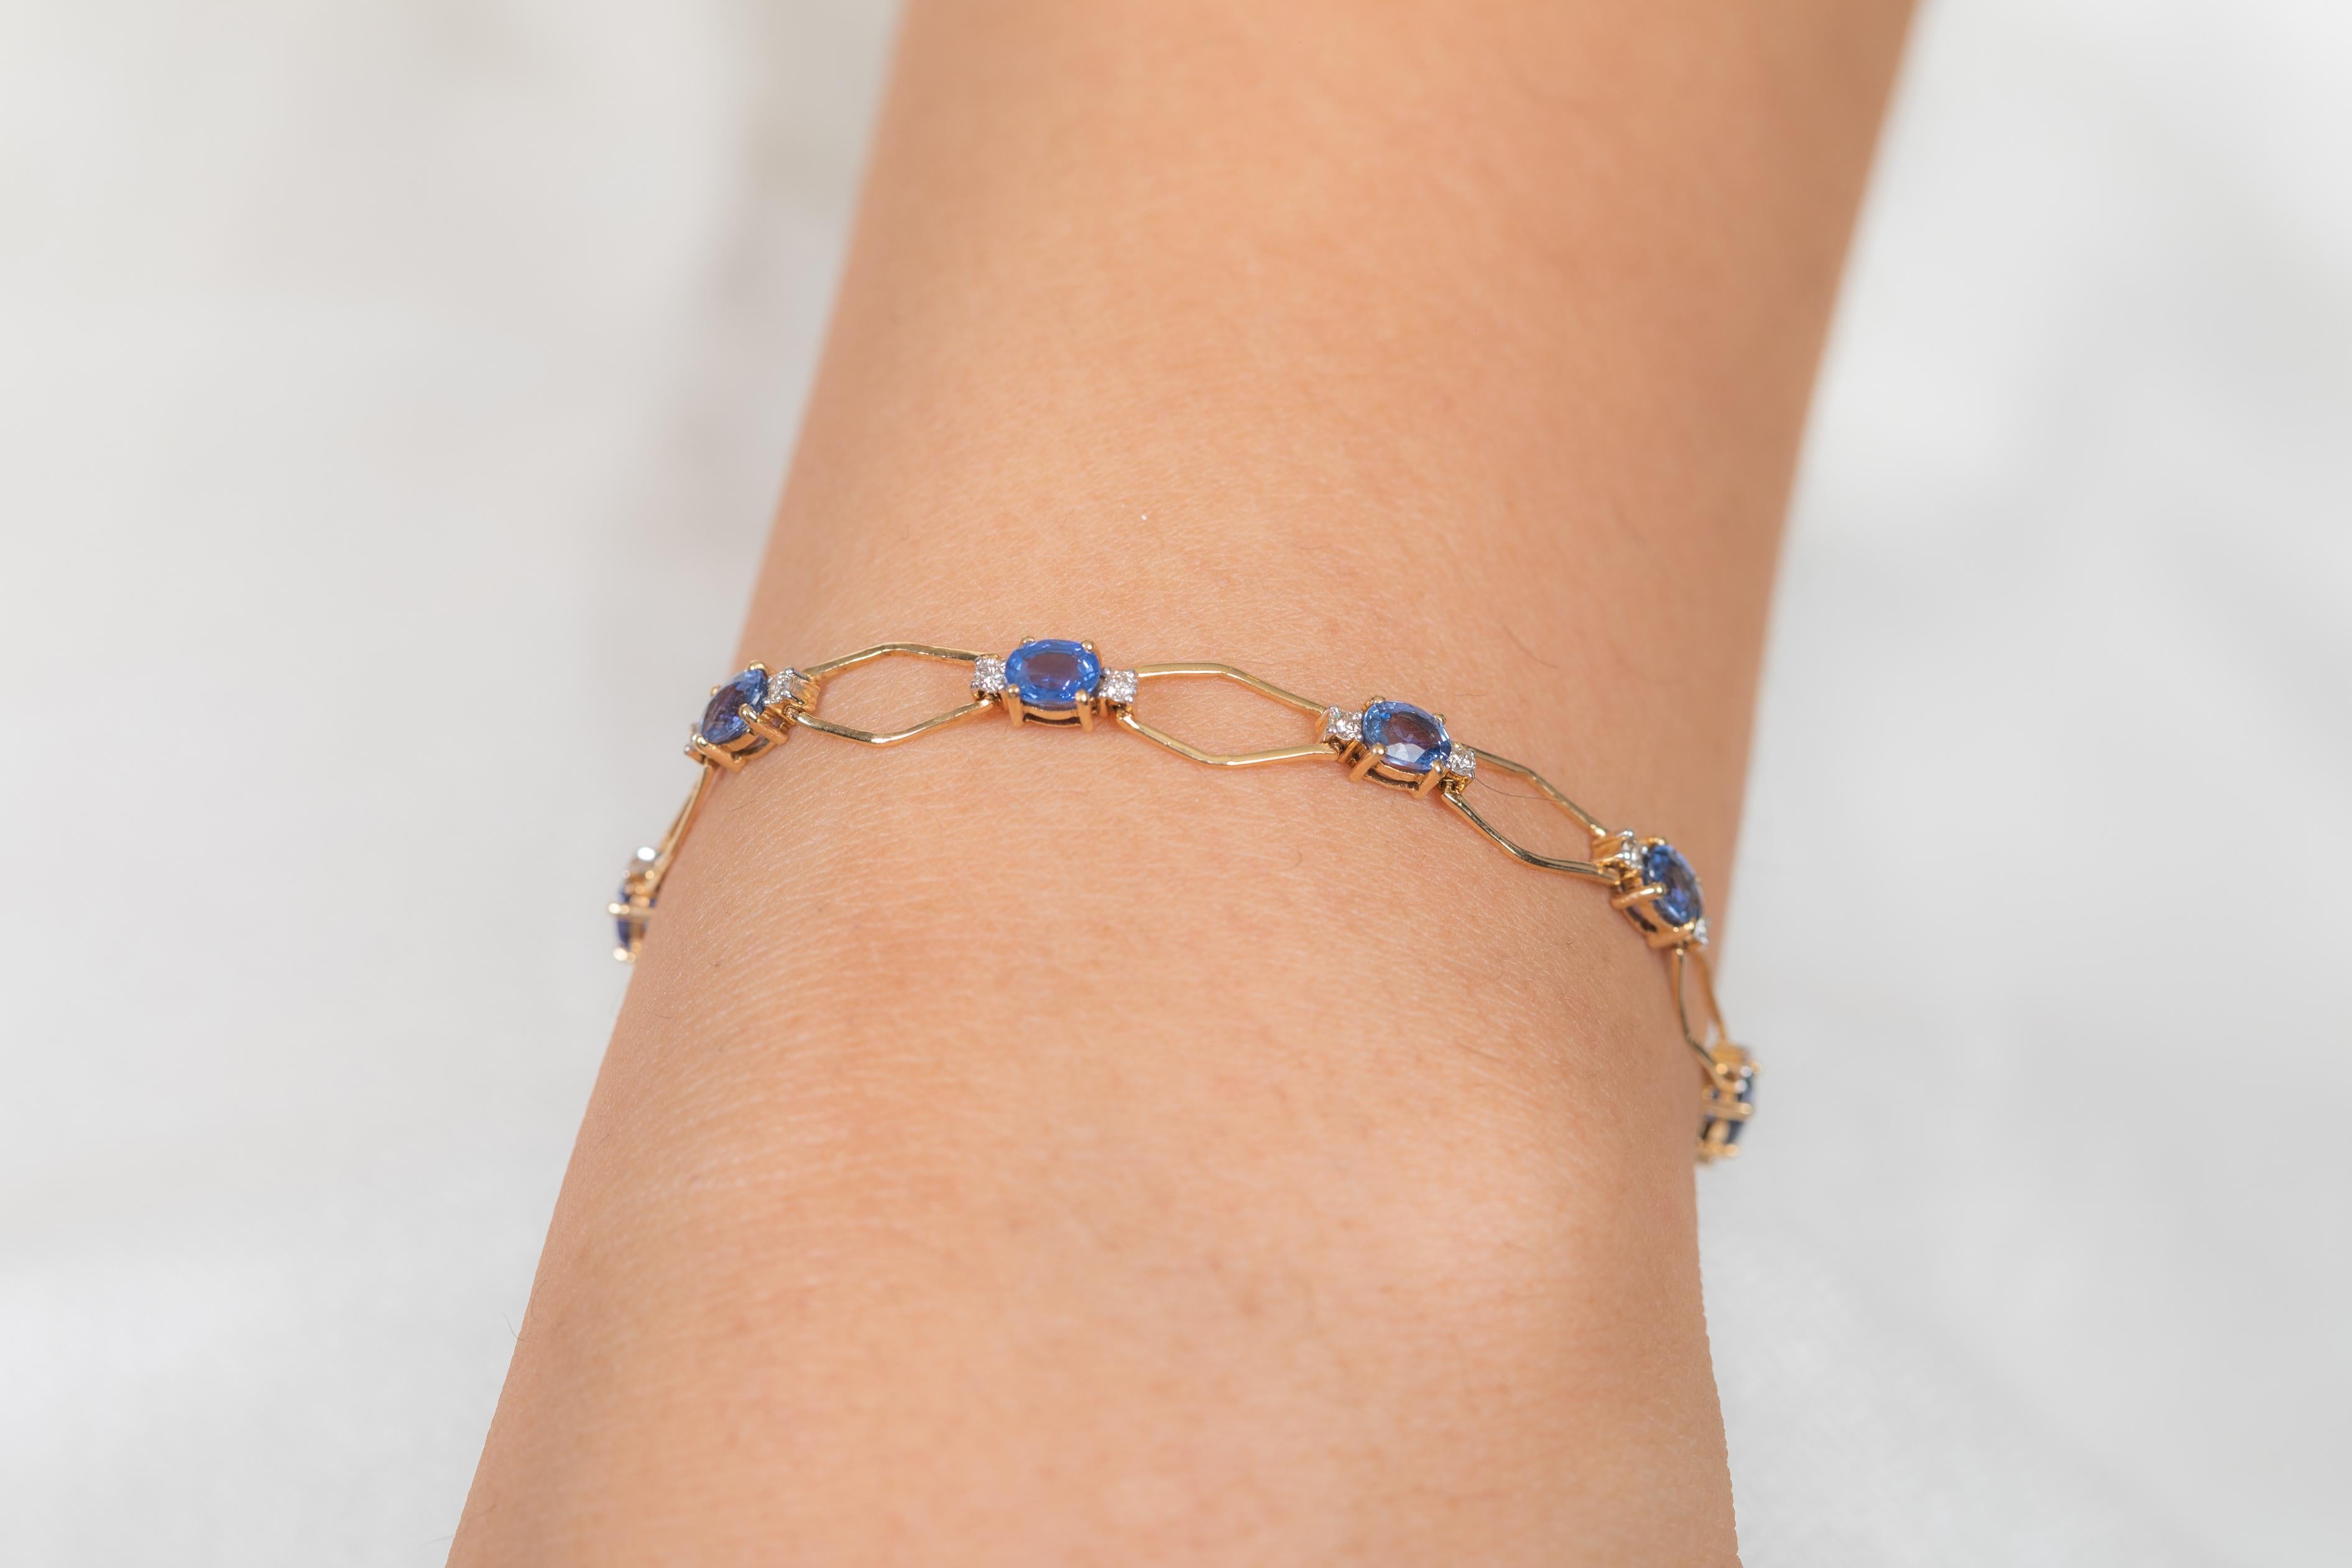 The wearing of charms may have begun as a form of amulet or talisman to ward off evil spirits or bad luck. 
This blue sapphire bracelet has a oval cut gemstone and diamonds in 18K Gold. A perfect piece of jewelry to adorn your jewelry